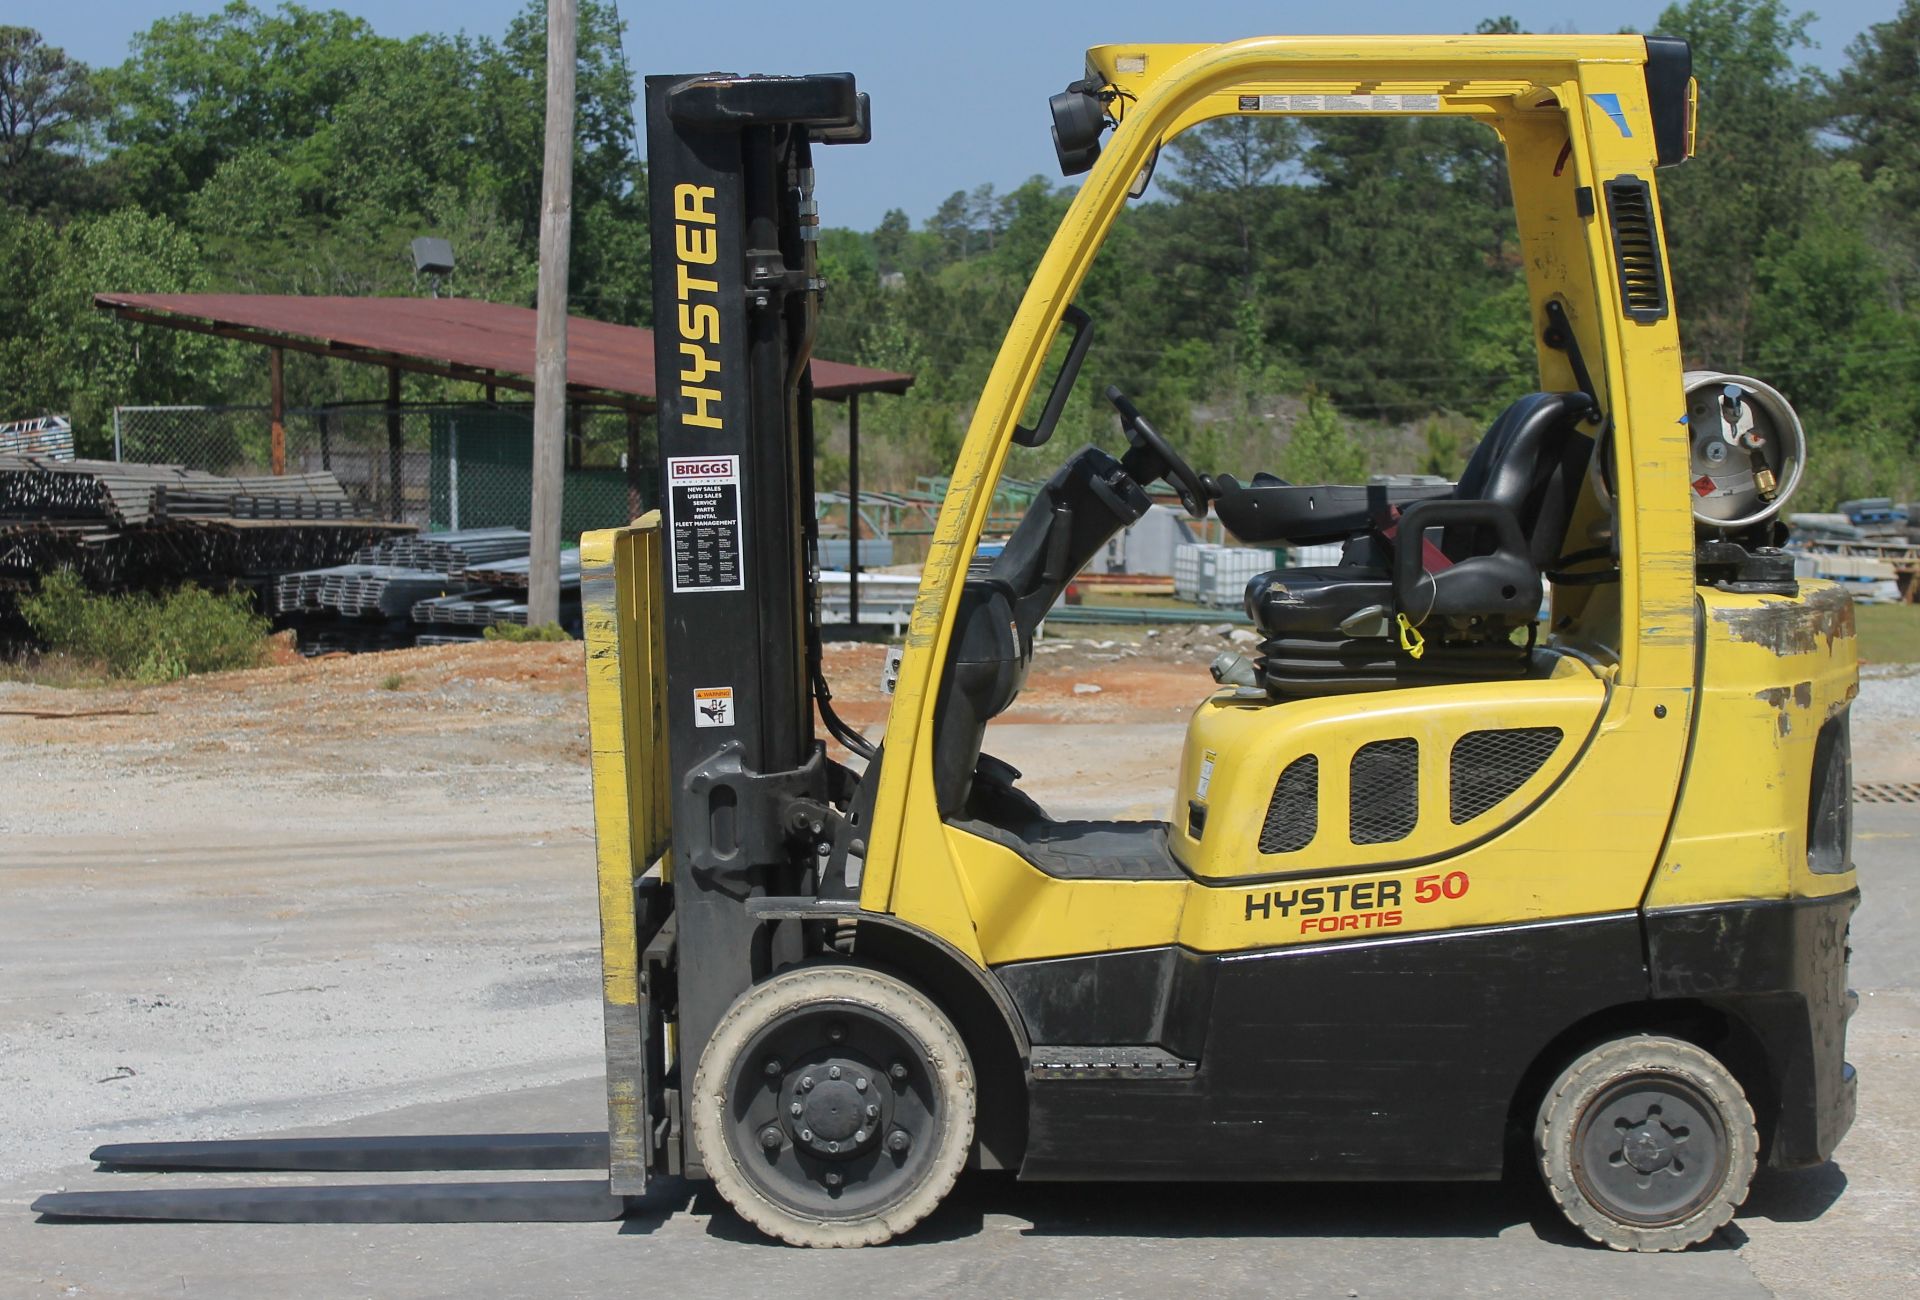 2012 HYSTER 5000 LB CAPACITY PROPANE FORKLIFT, 3 STAGE MAST (CHECK VIDEO) - Image 5 of 7